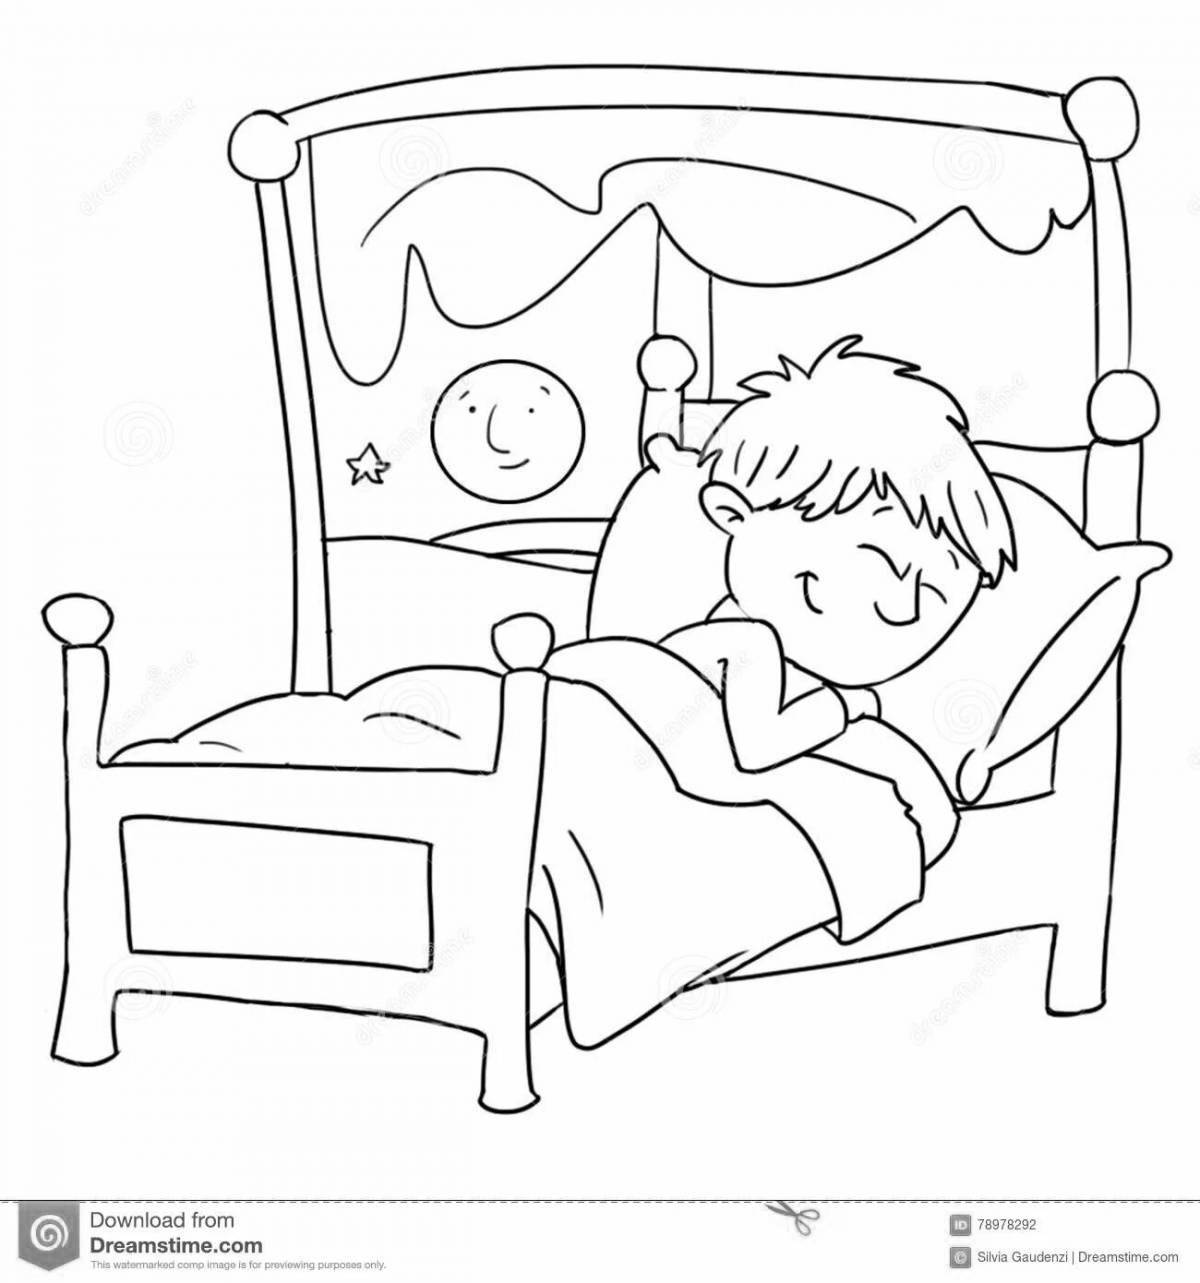 Relaxed children sleeping coloring pages